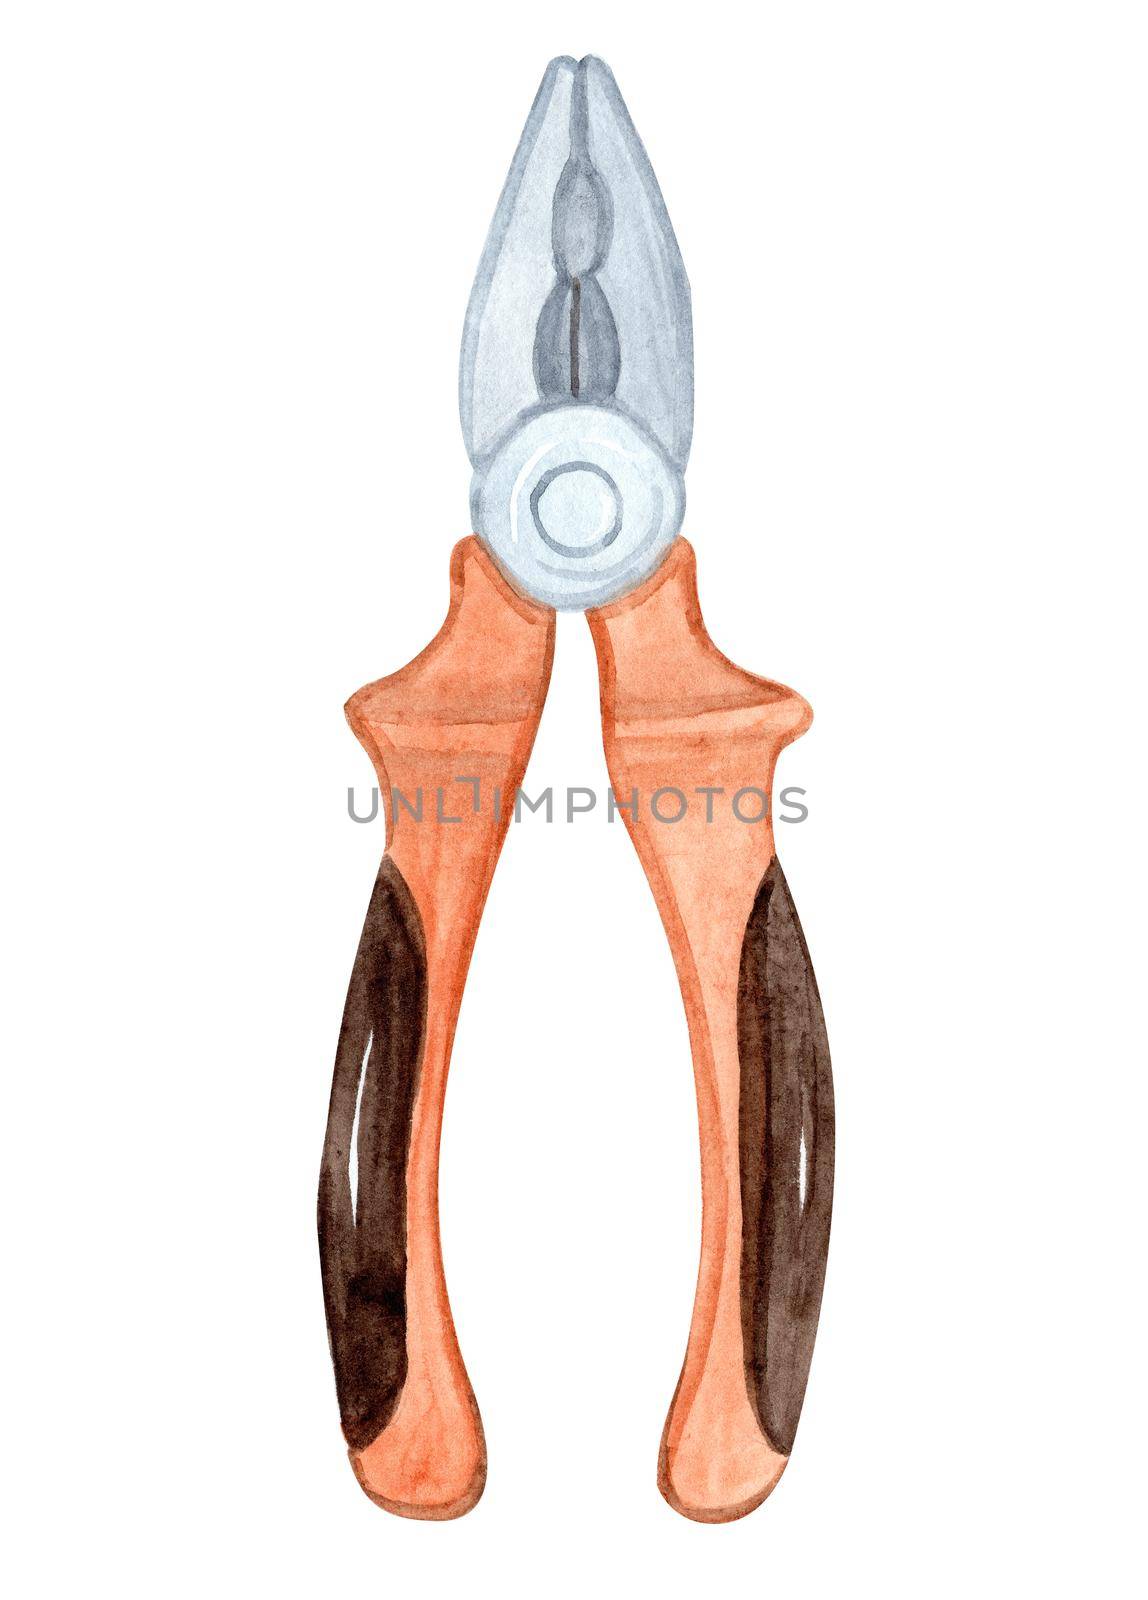 watercolor orange pliers tool isolated on white by dreamloud